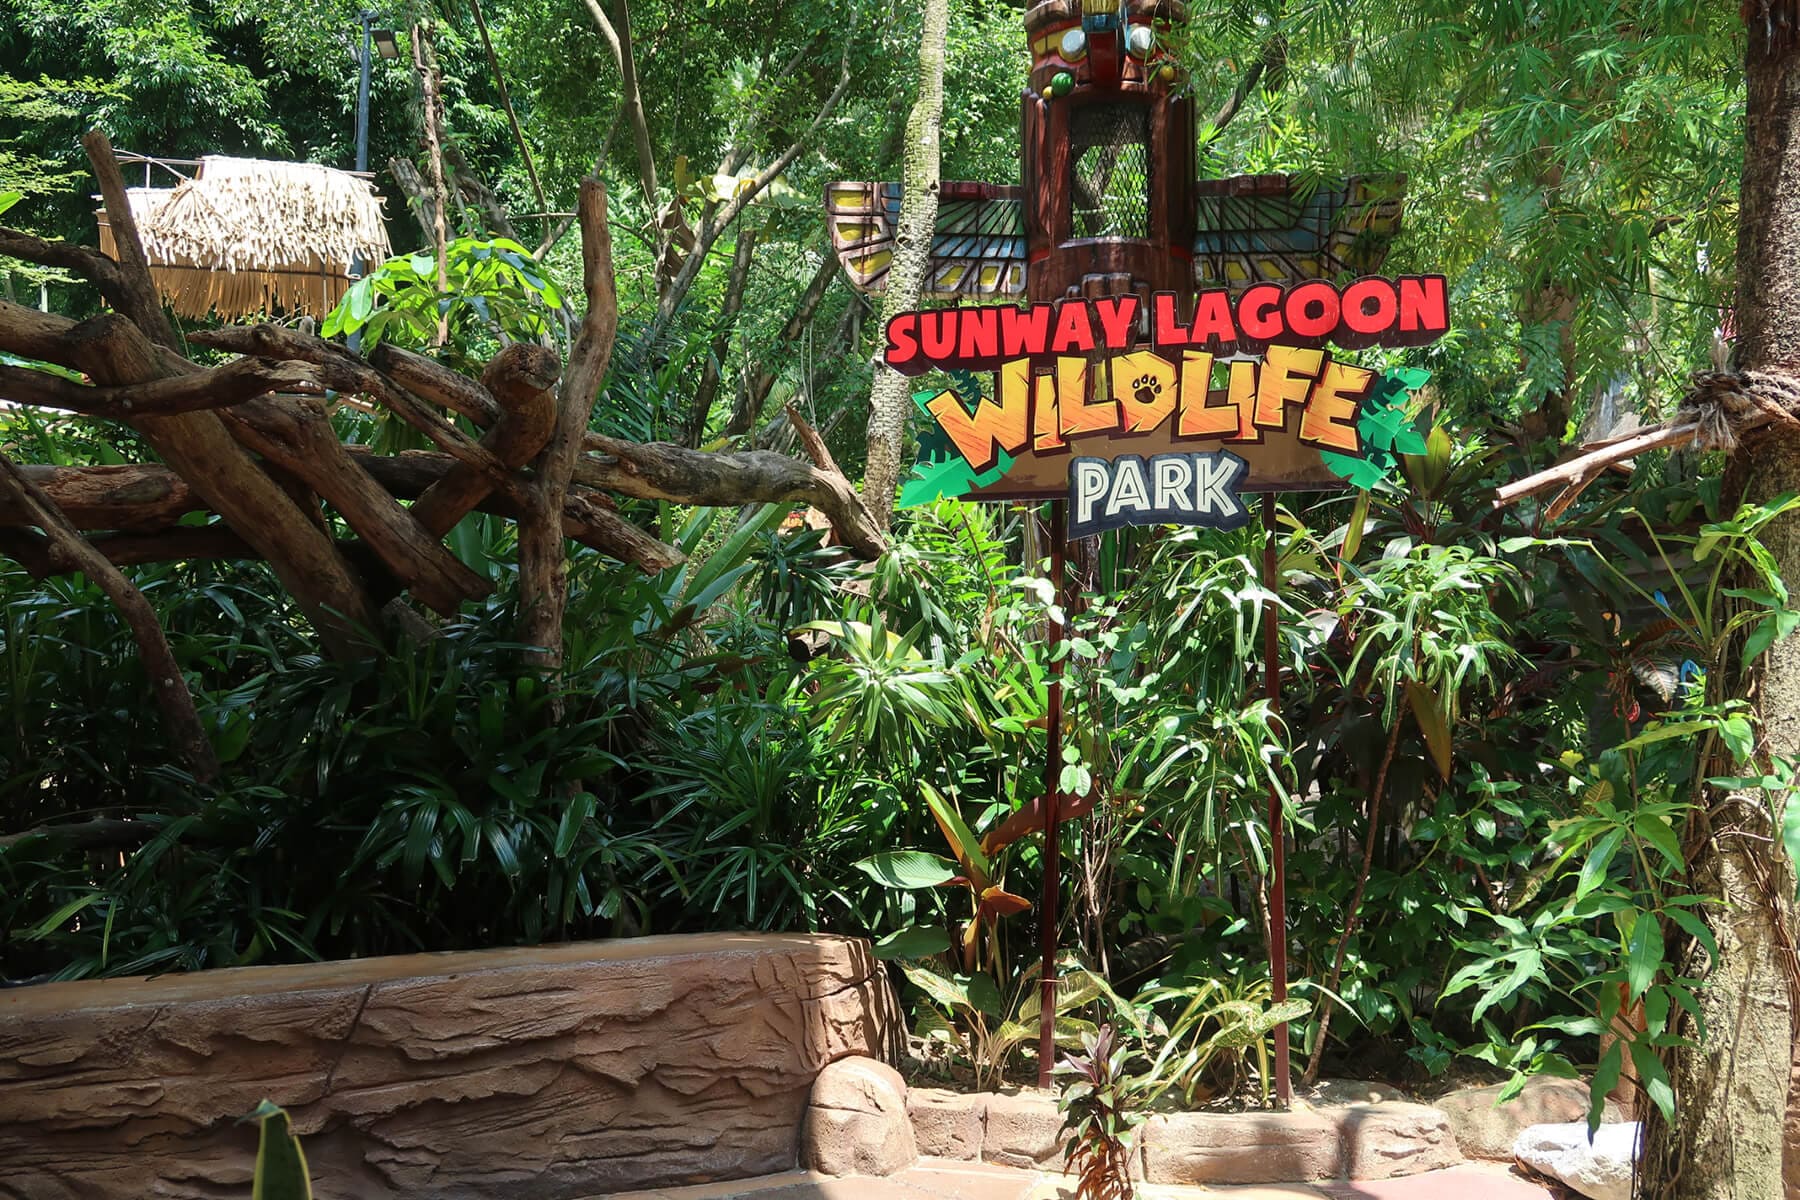 pend a day at Sunway Lagoon’s Wildlife Park and meet more than 150 exotic animals!